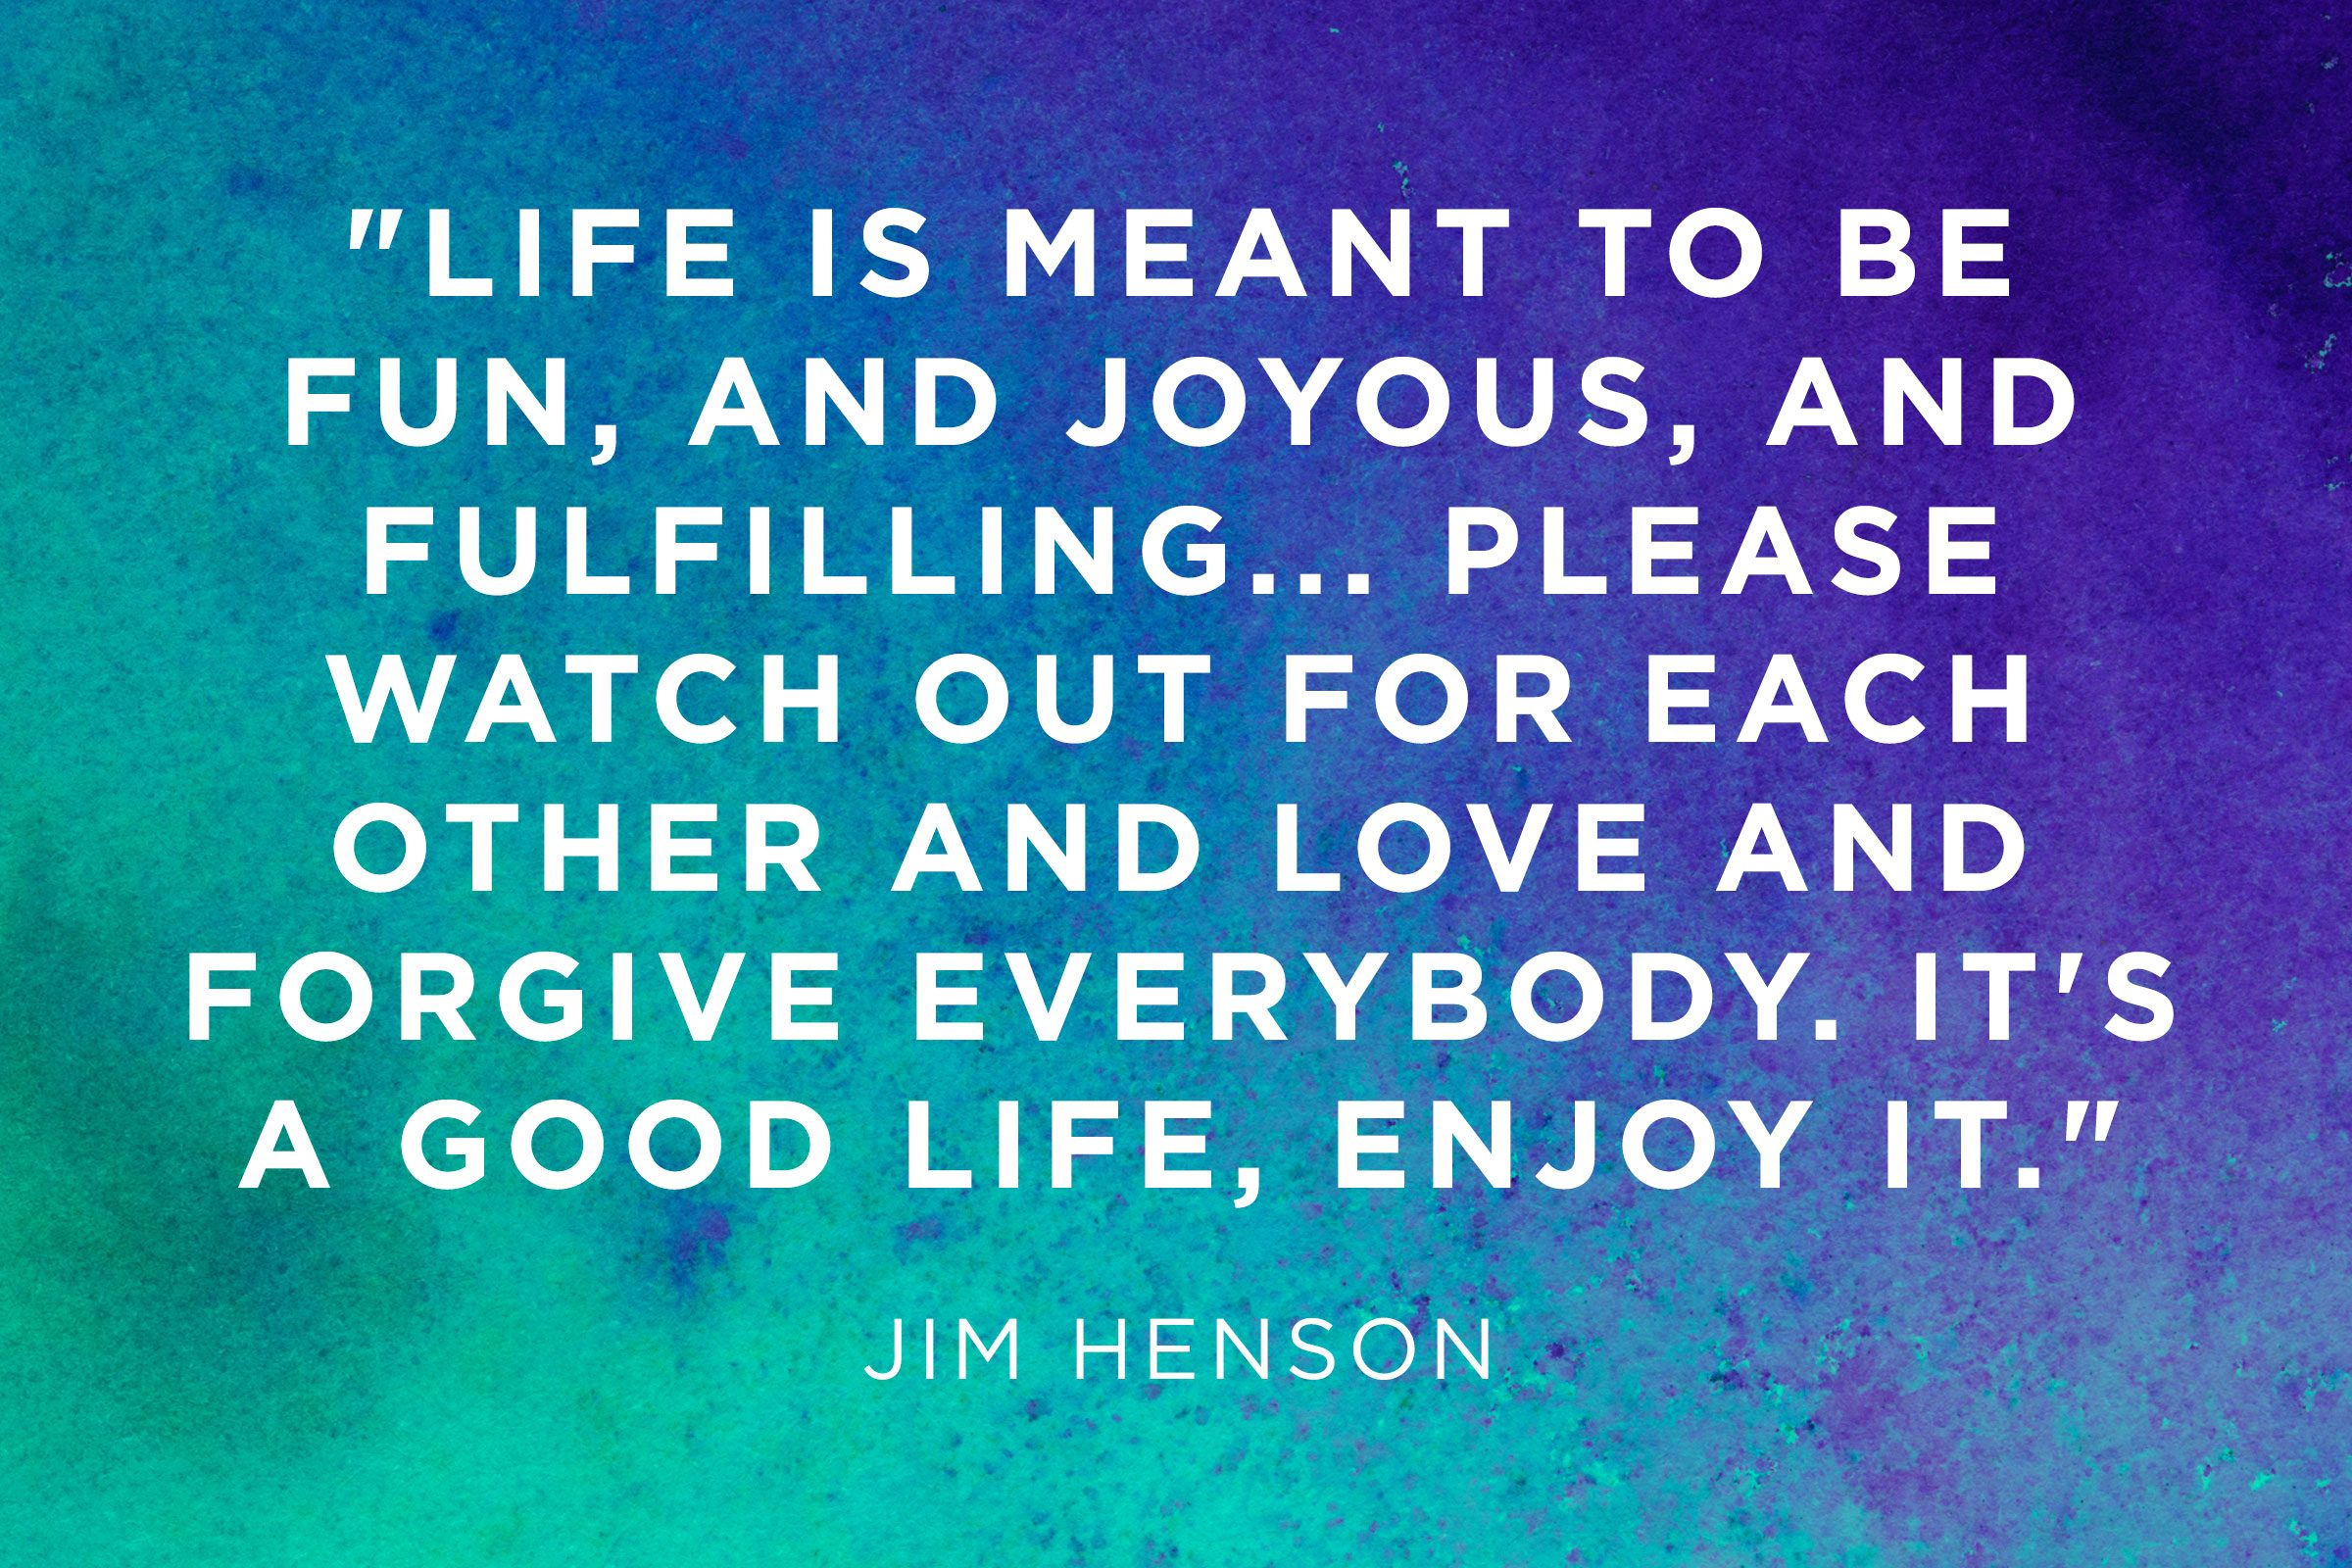 Jim Henson The meaning of life is passion